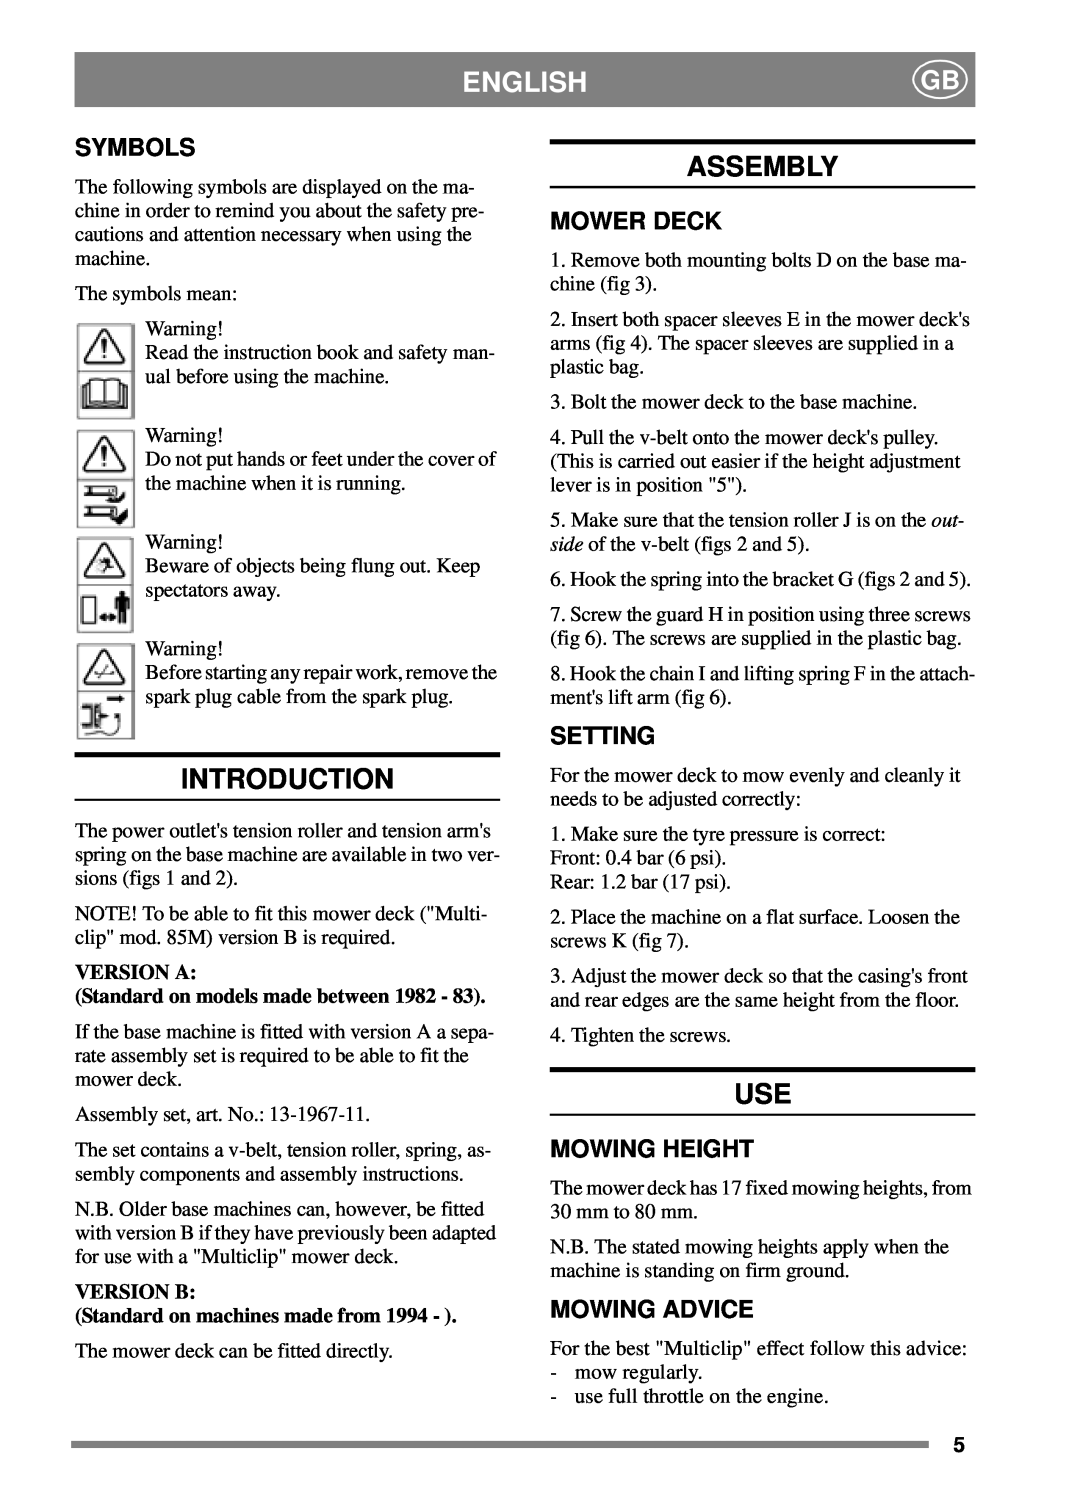 Stiga 8211-3013-10 manual English, Assembly, Introduction, Symbols, Mower Deck, Setting, Mowing Height, Mowing Advice 